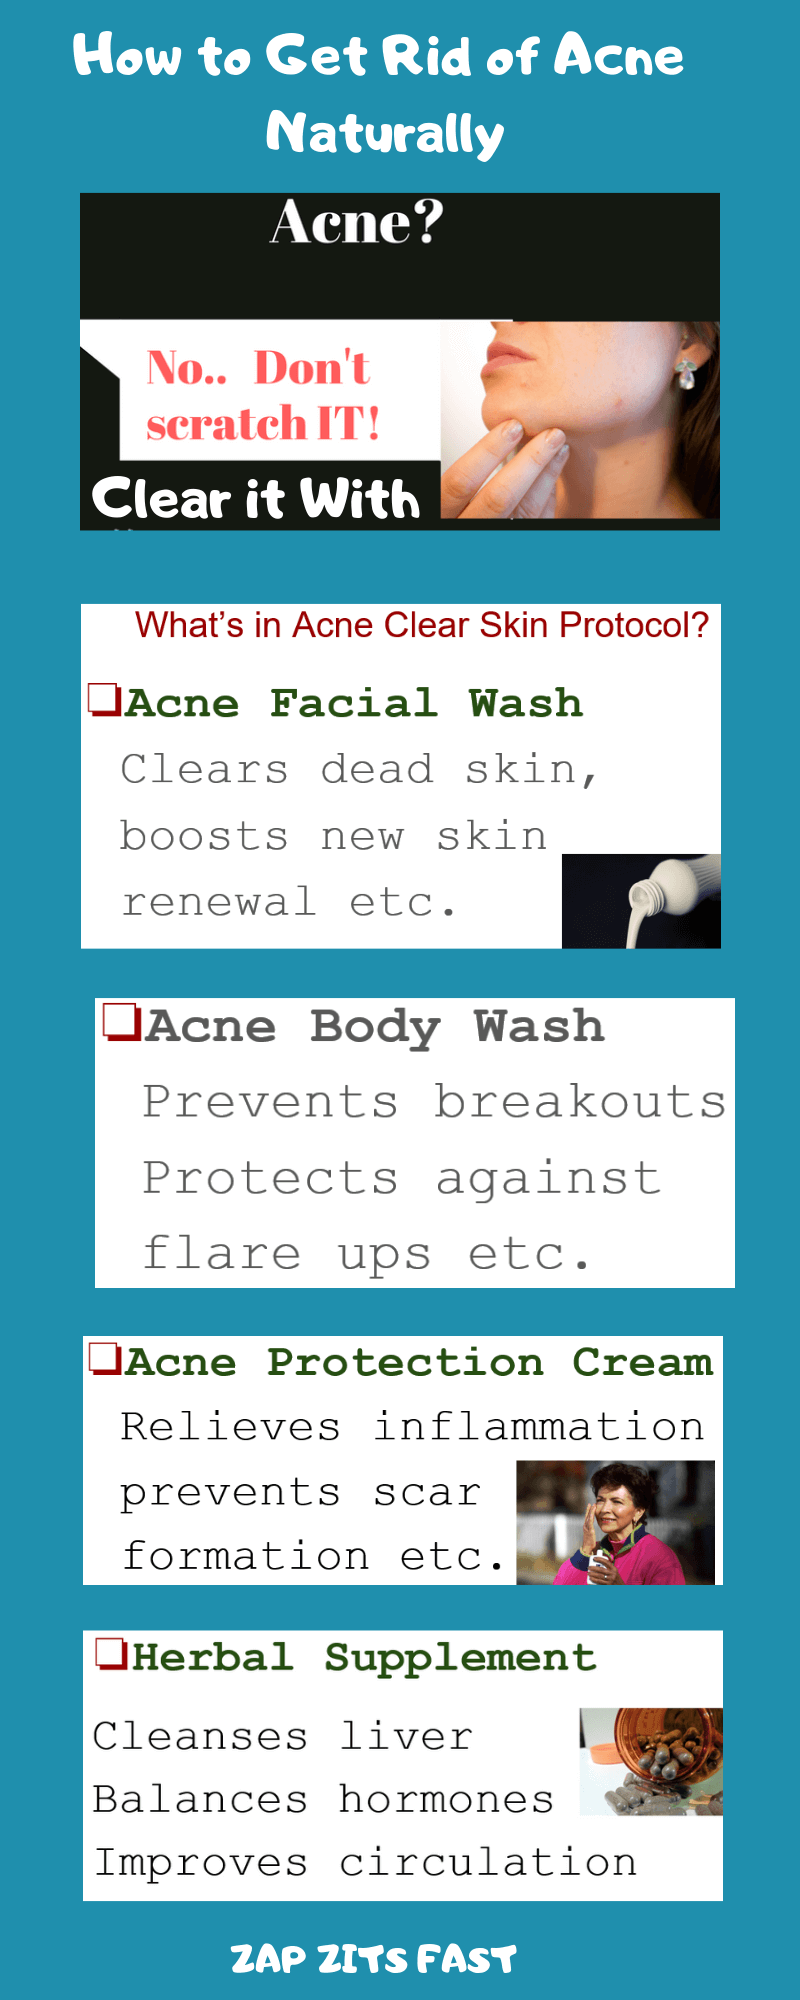 Clear acne and acne scars naturally